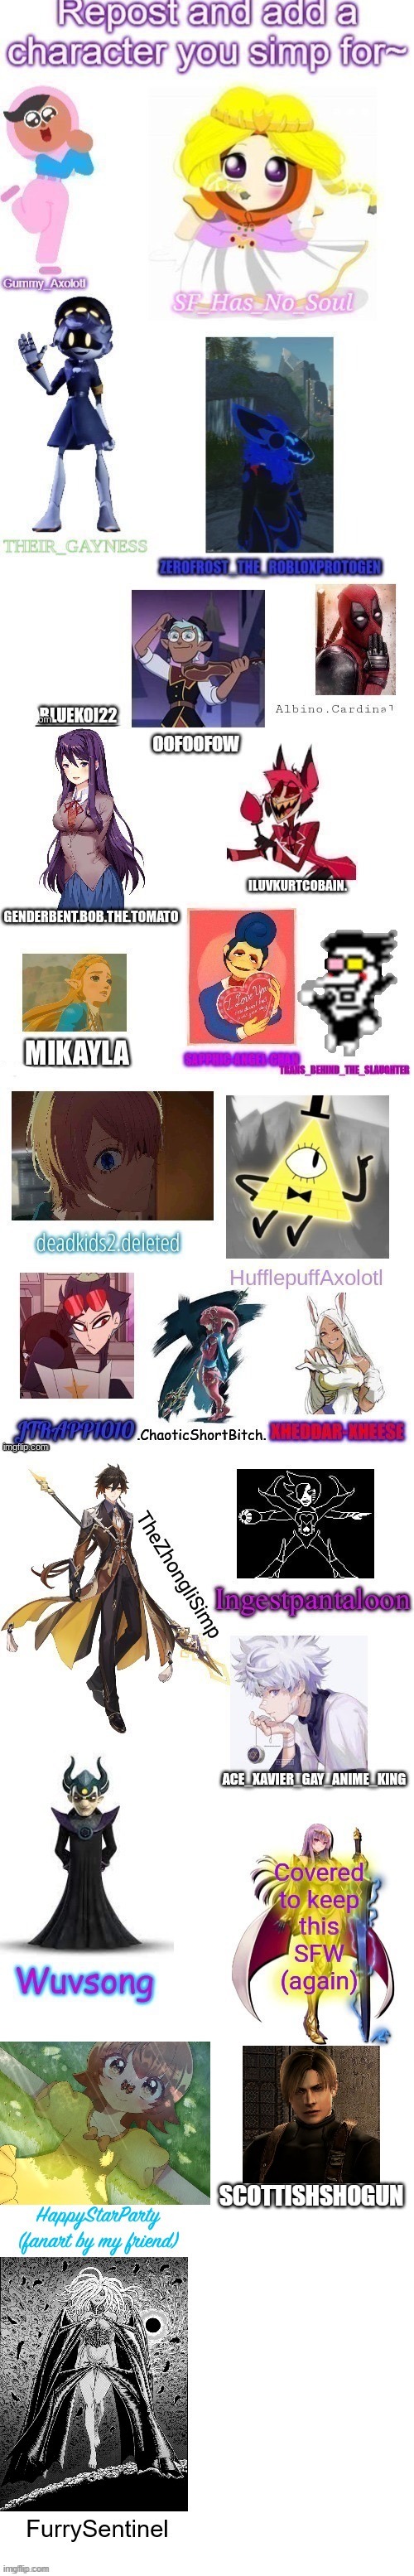 Most of Y'all are weird. YOU'RE WEIRD. | SCOTTISHSHOGUN | image tagged in anime,fun | made w/ Imgflip meme maker